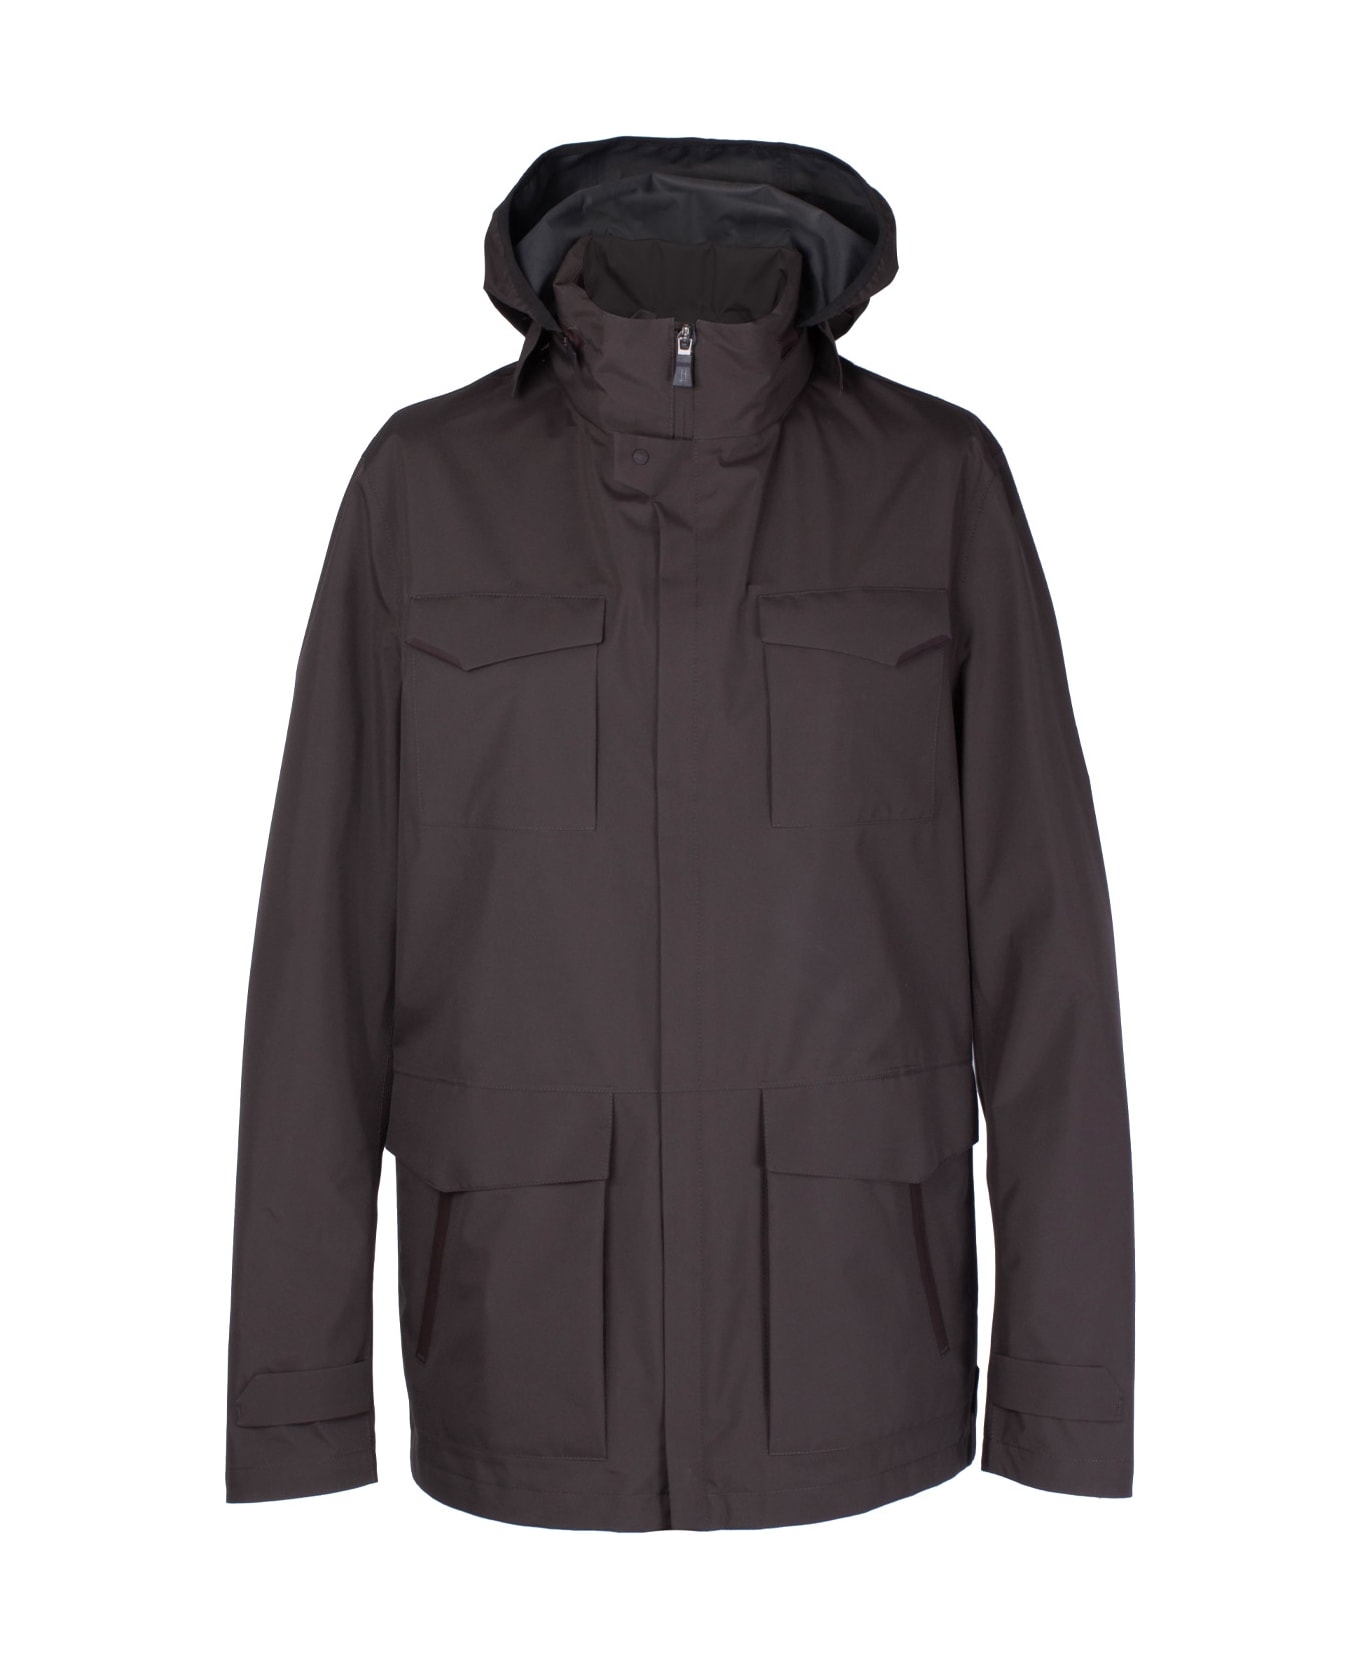 Herno Jacket With Removable Hood - Marrone